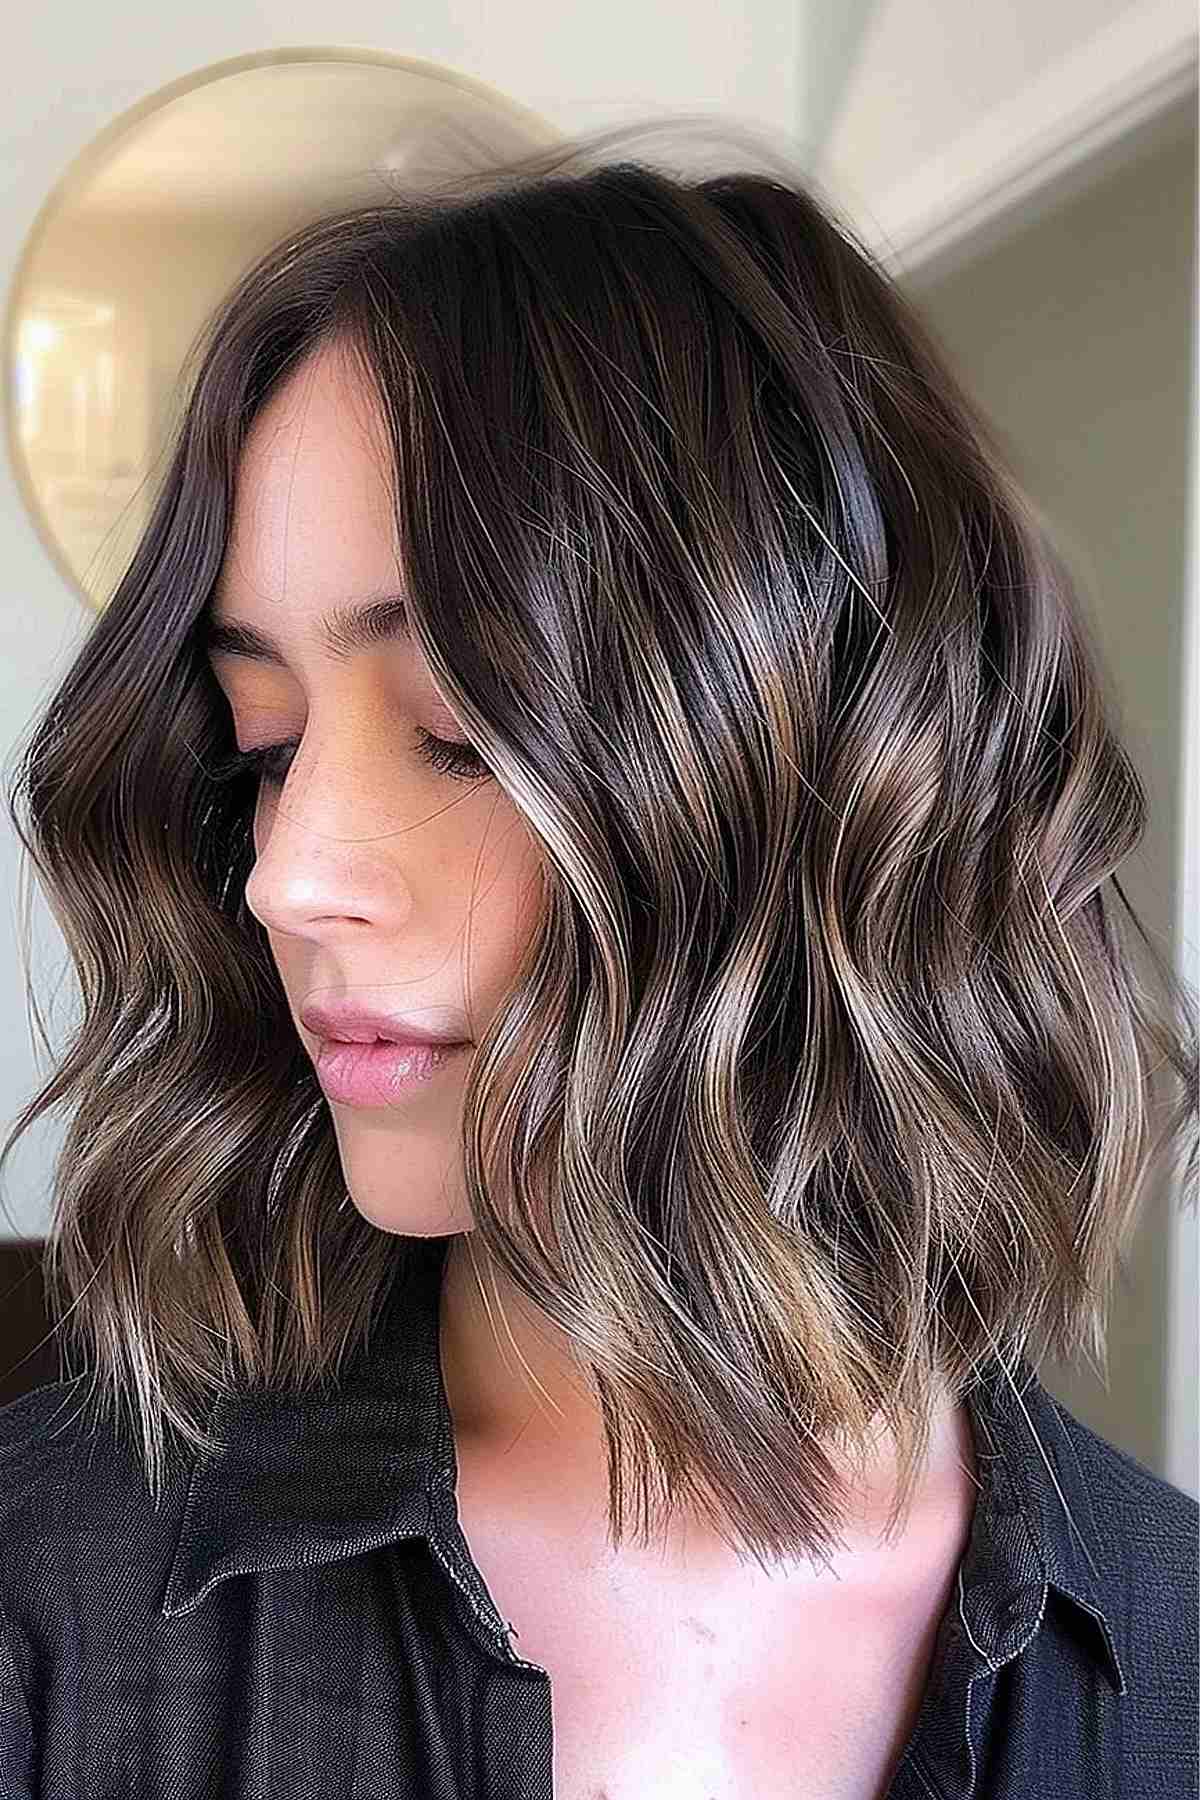 Woman with a long choppy bob styled in dark wavy hair with lighter balayage highlights